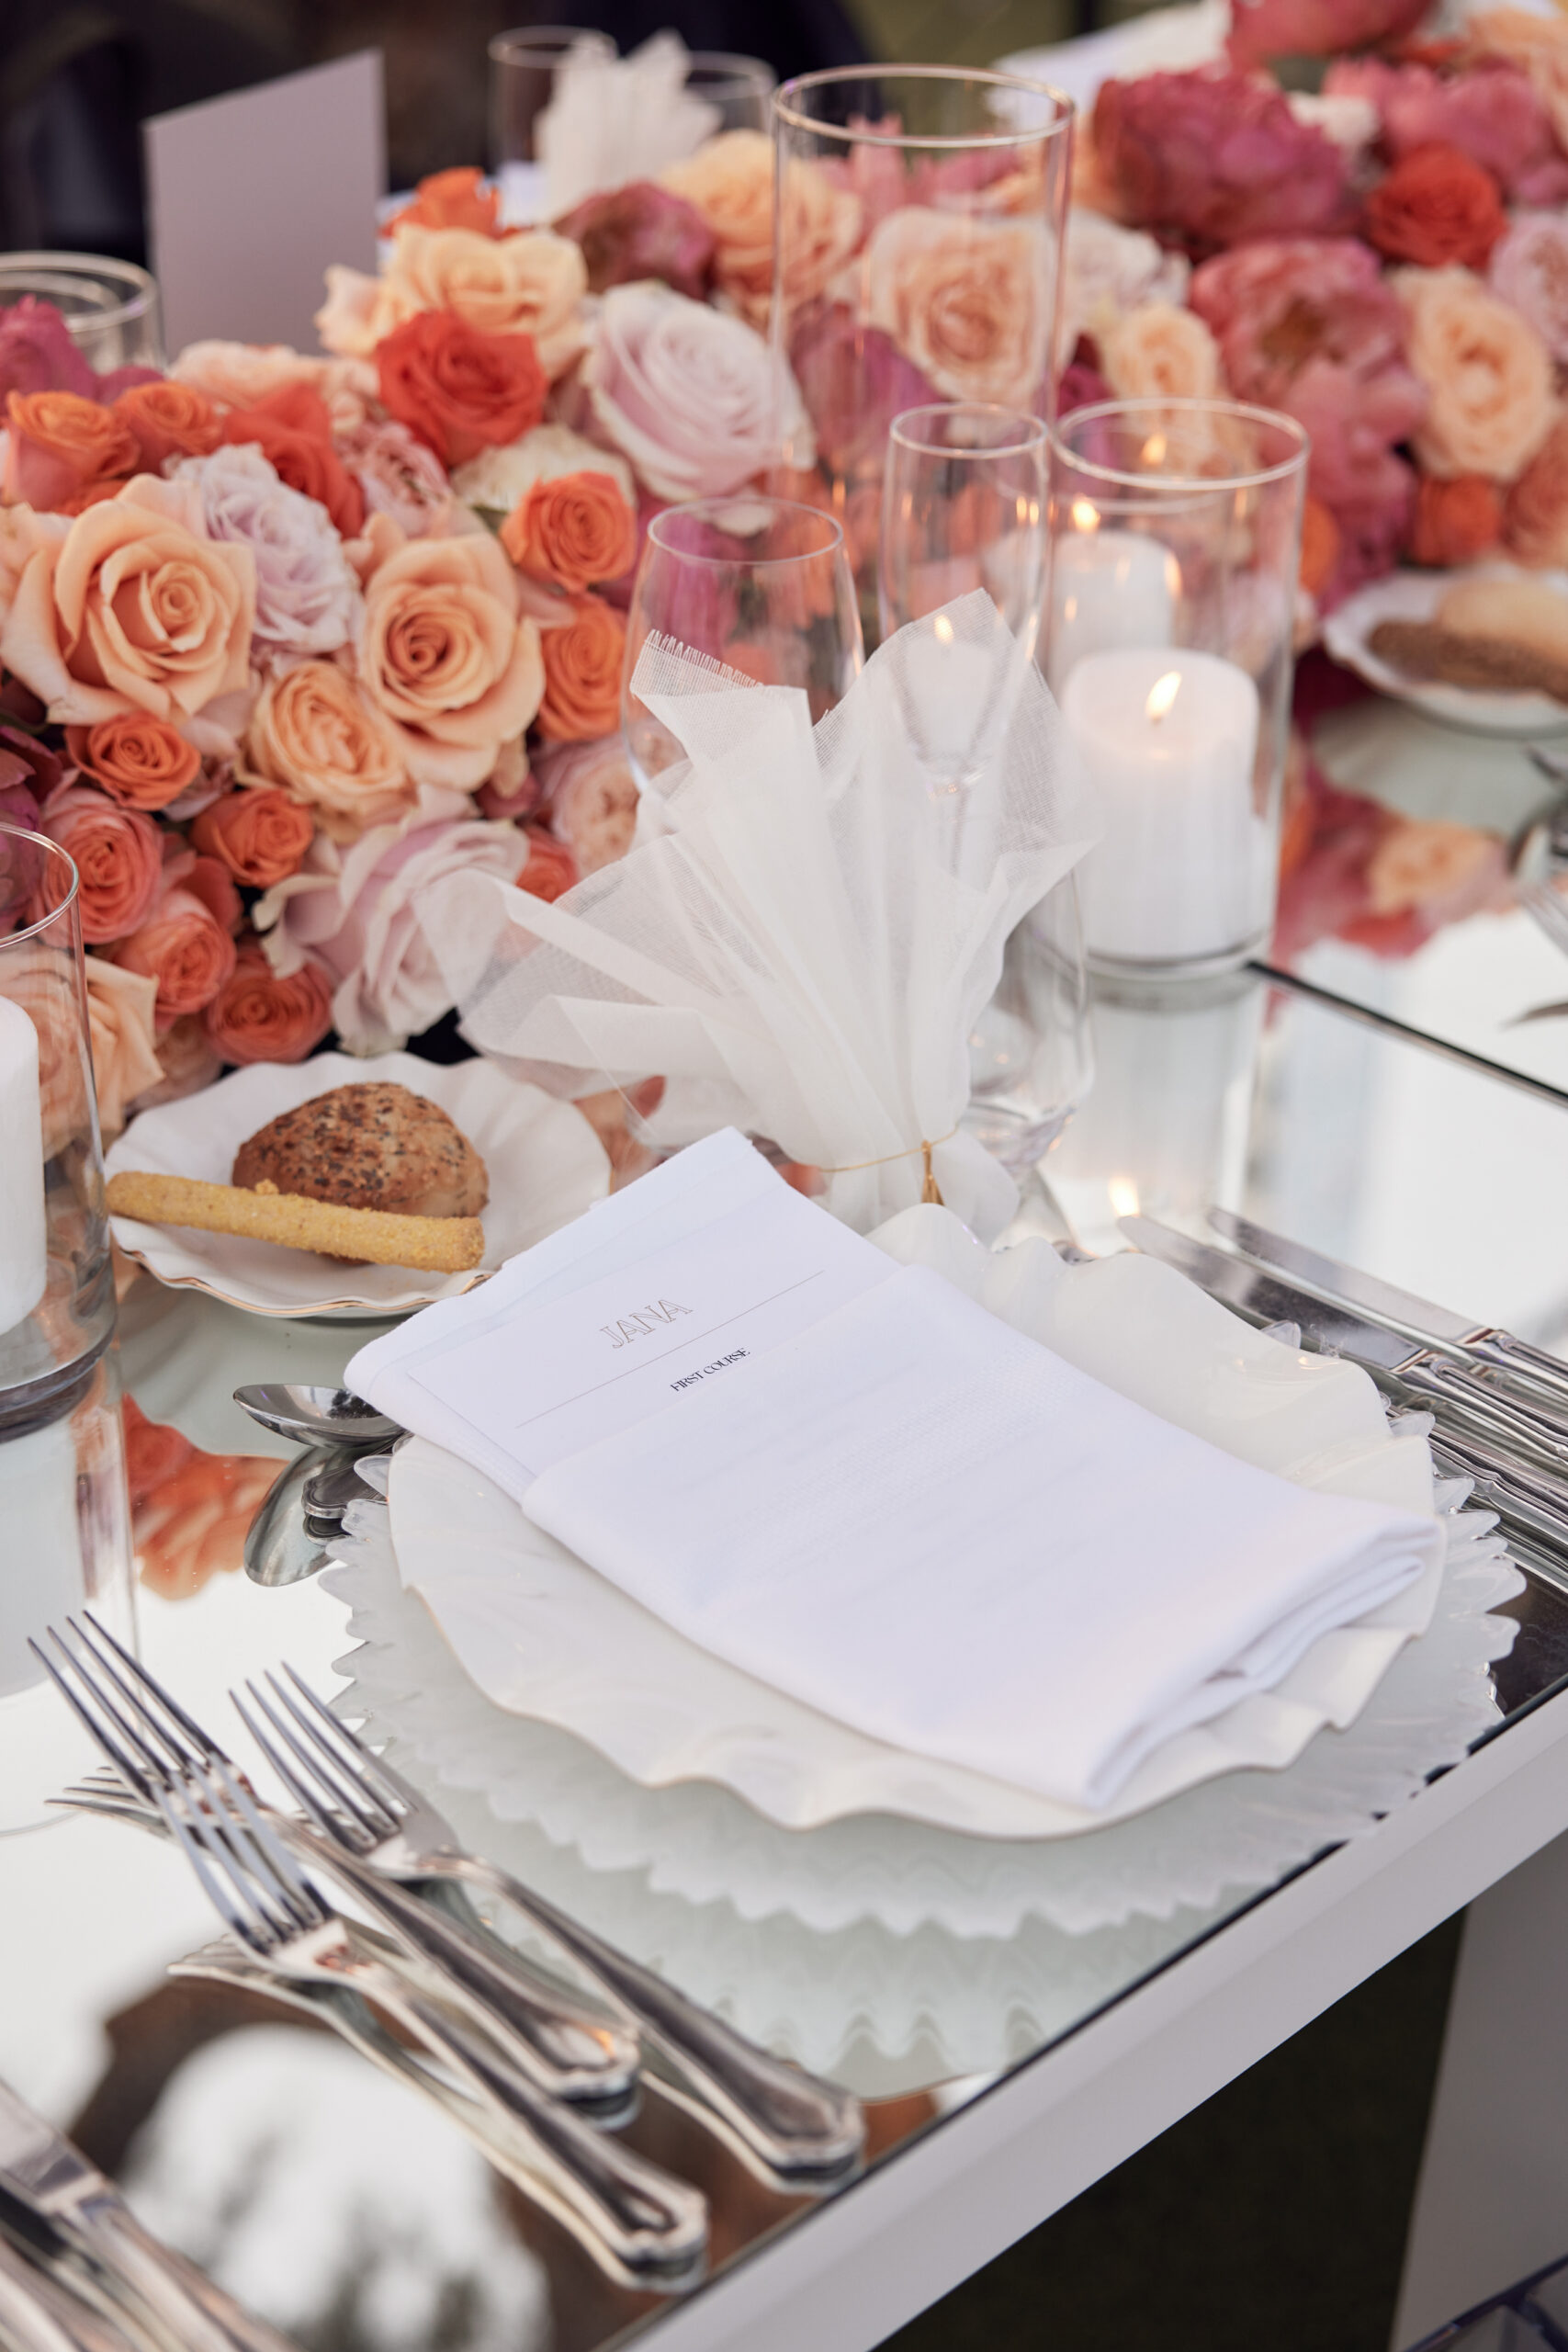 symphony-of-romance-wedding-reception-table-setting-with-roses